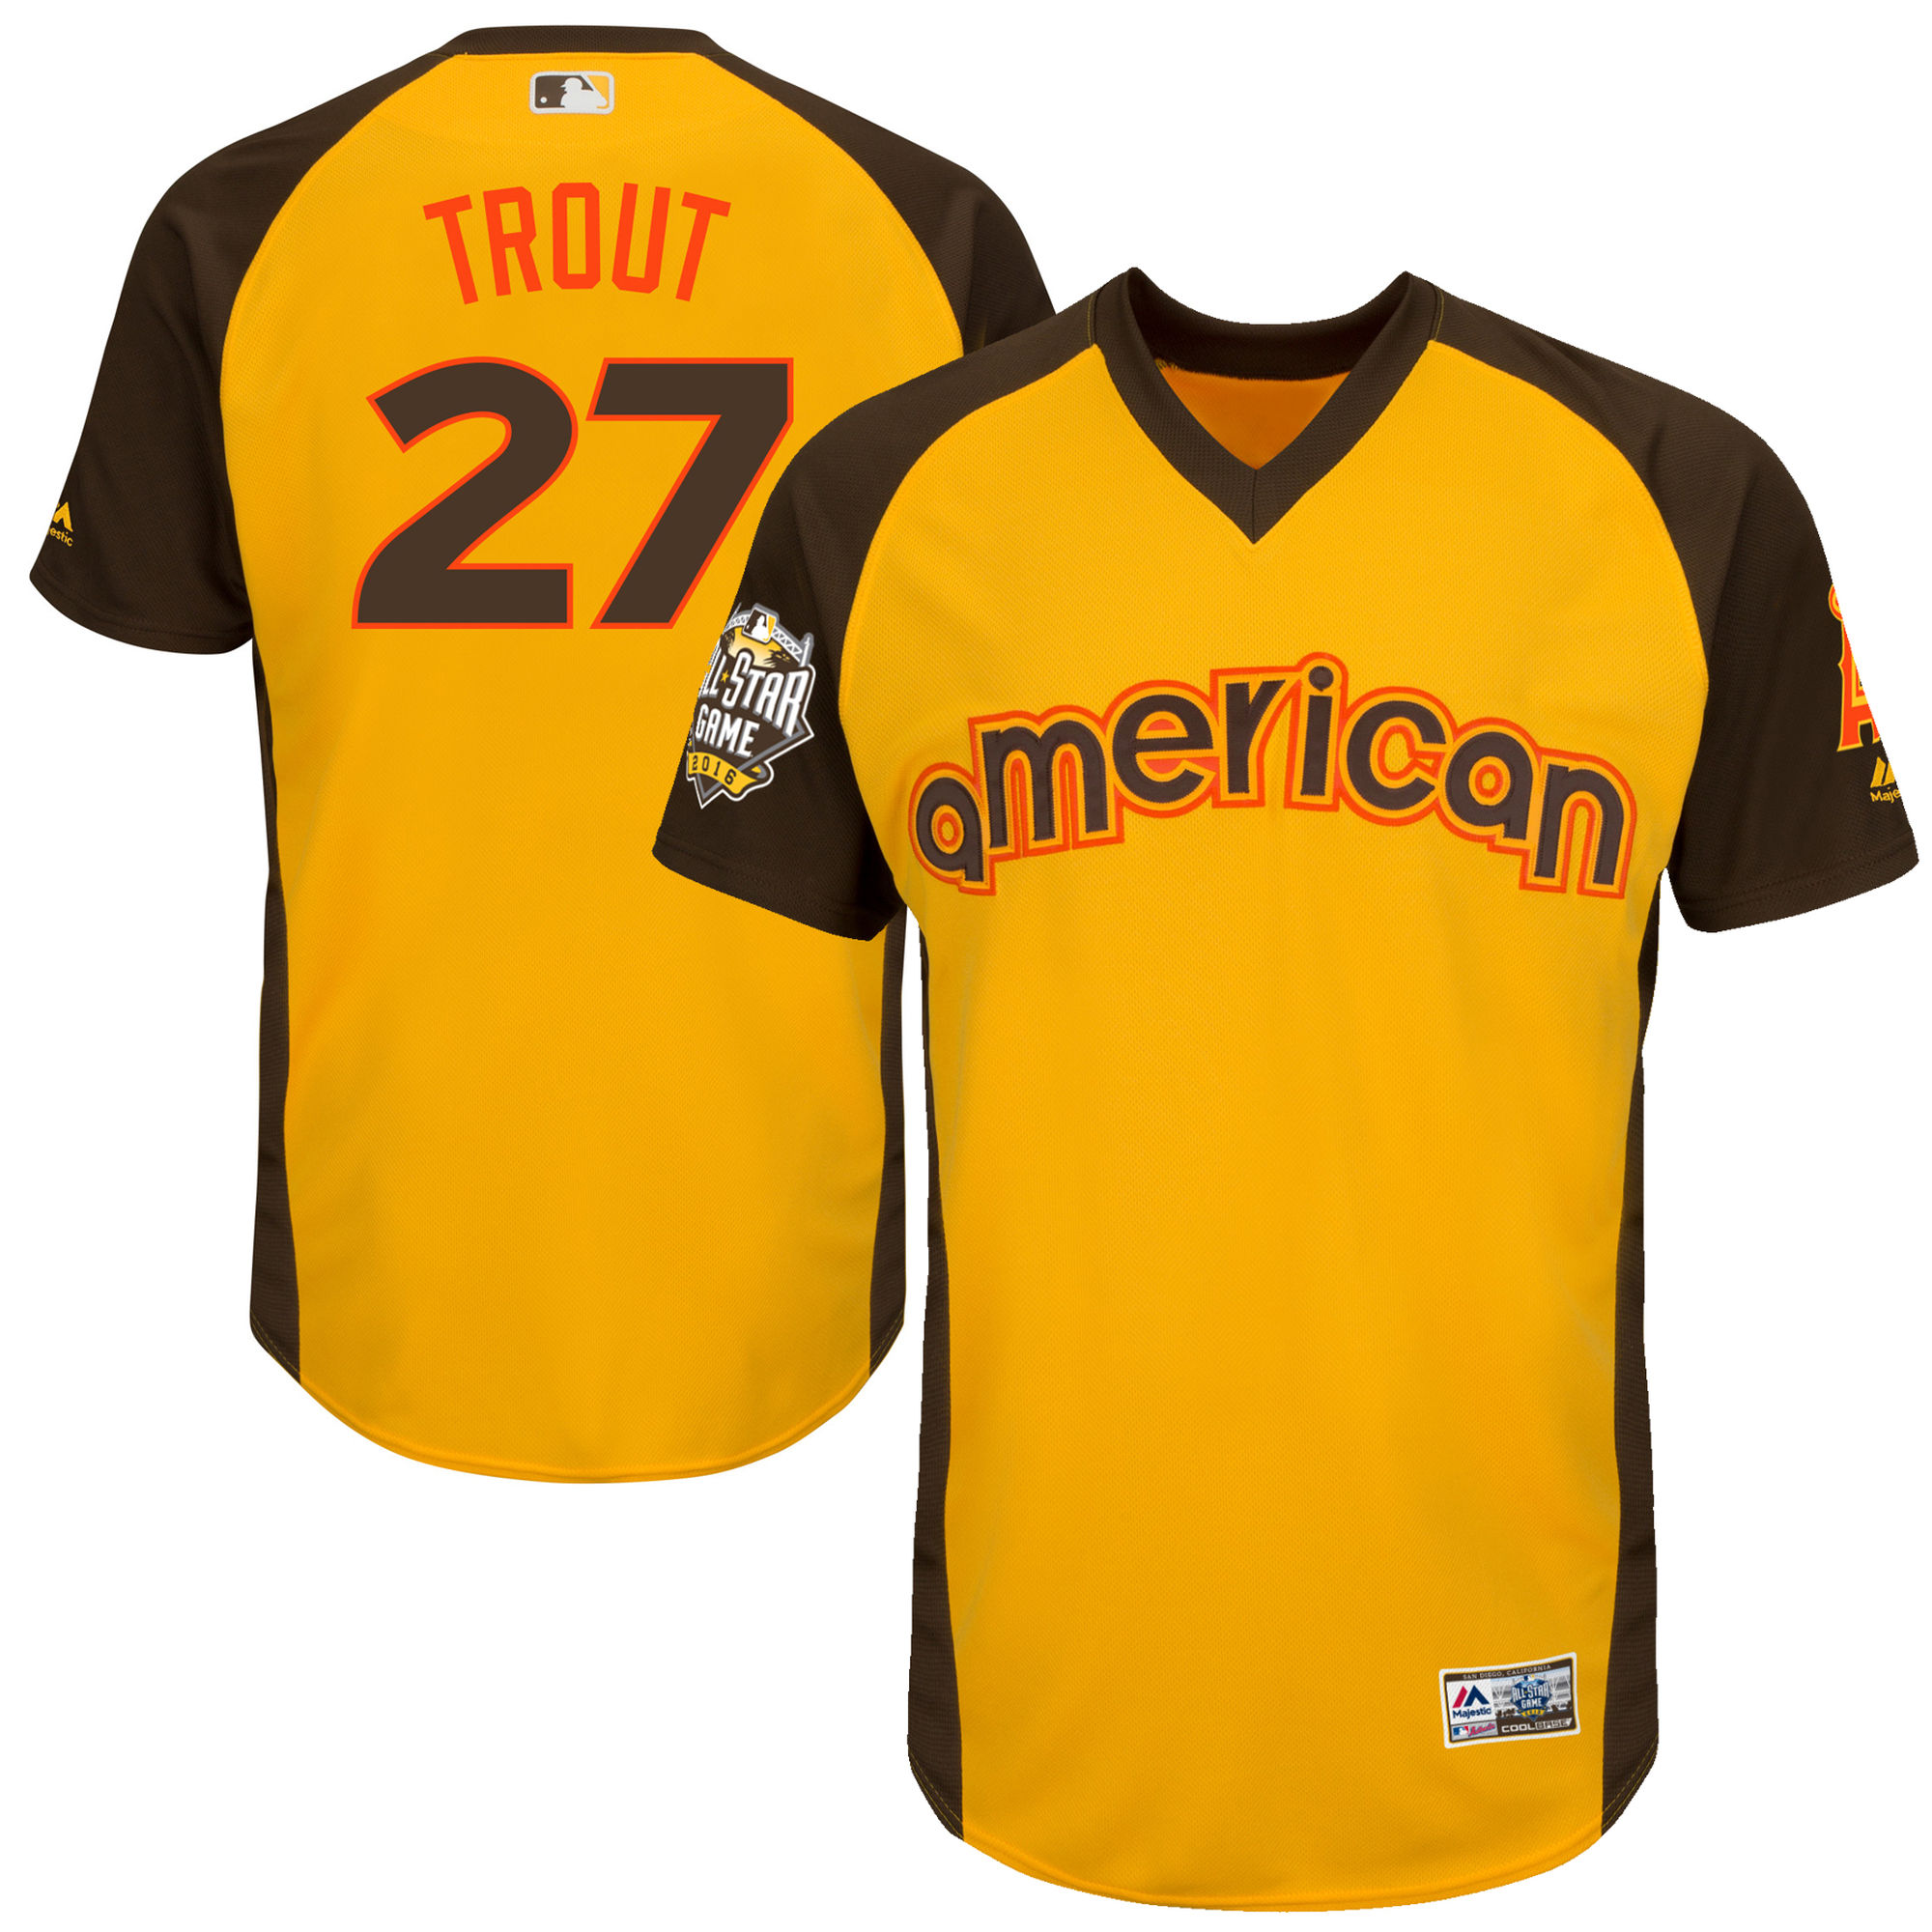 Angels 27 Mike Trout Yellow 2016 All-Star Game Cool Base Batting Practice Player Jersey